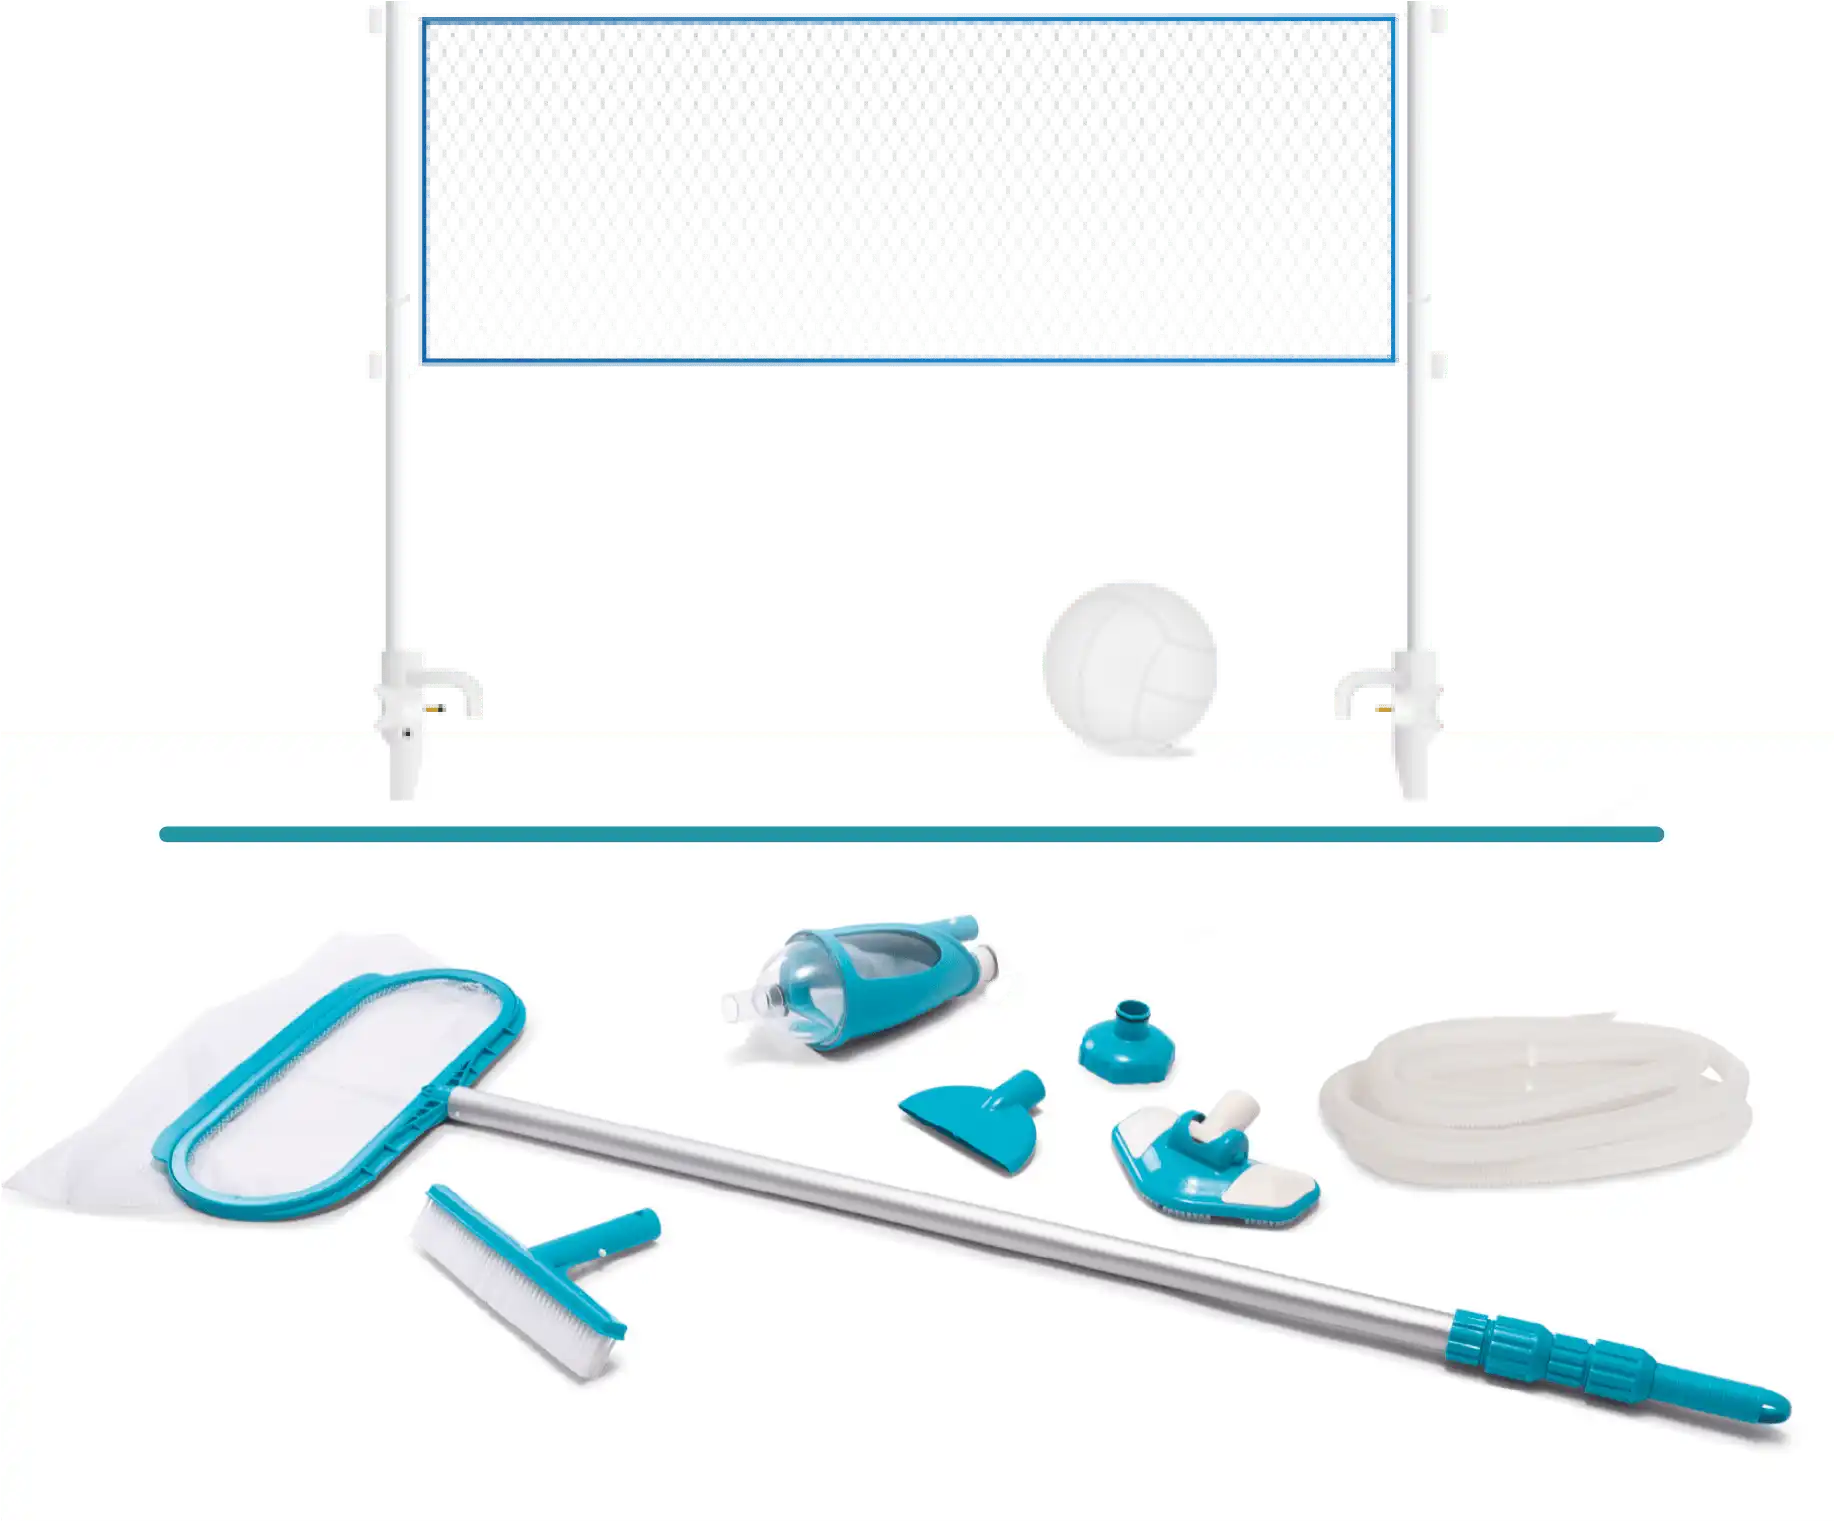 Volleyball Set & Deluxe Pool Maintenance Kit